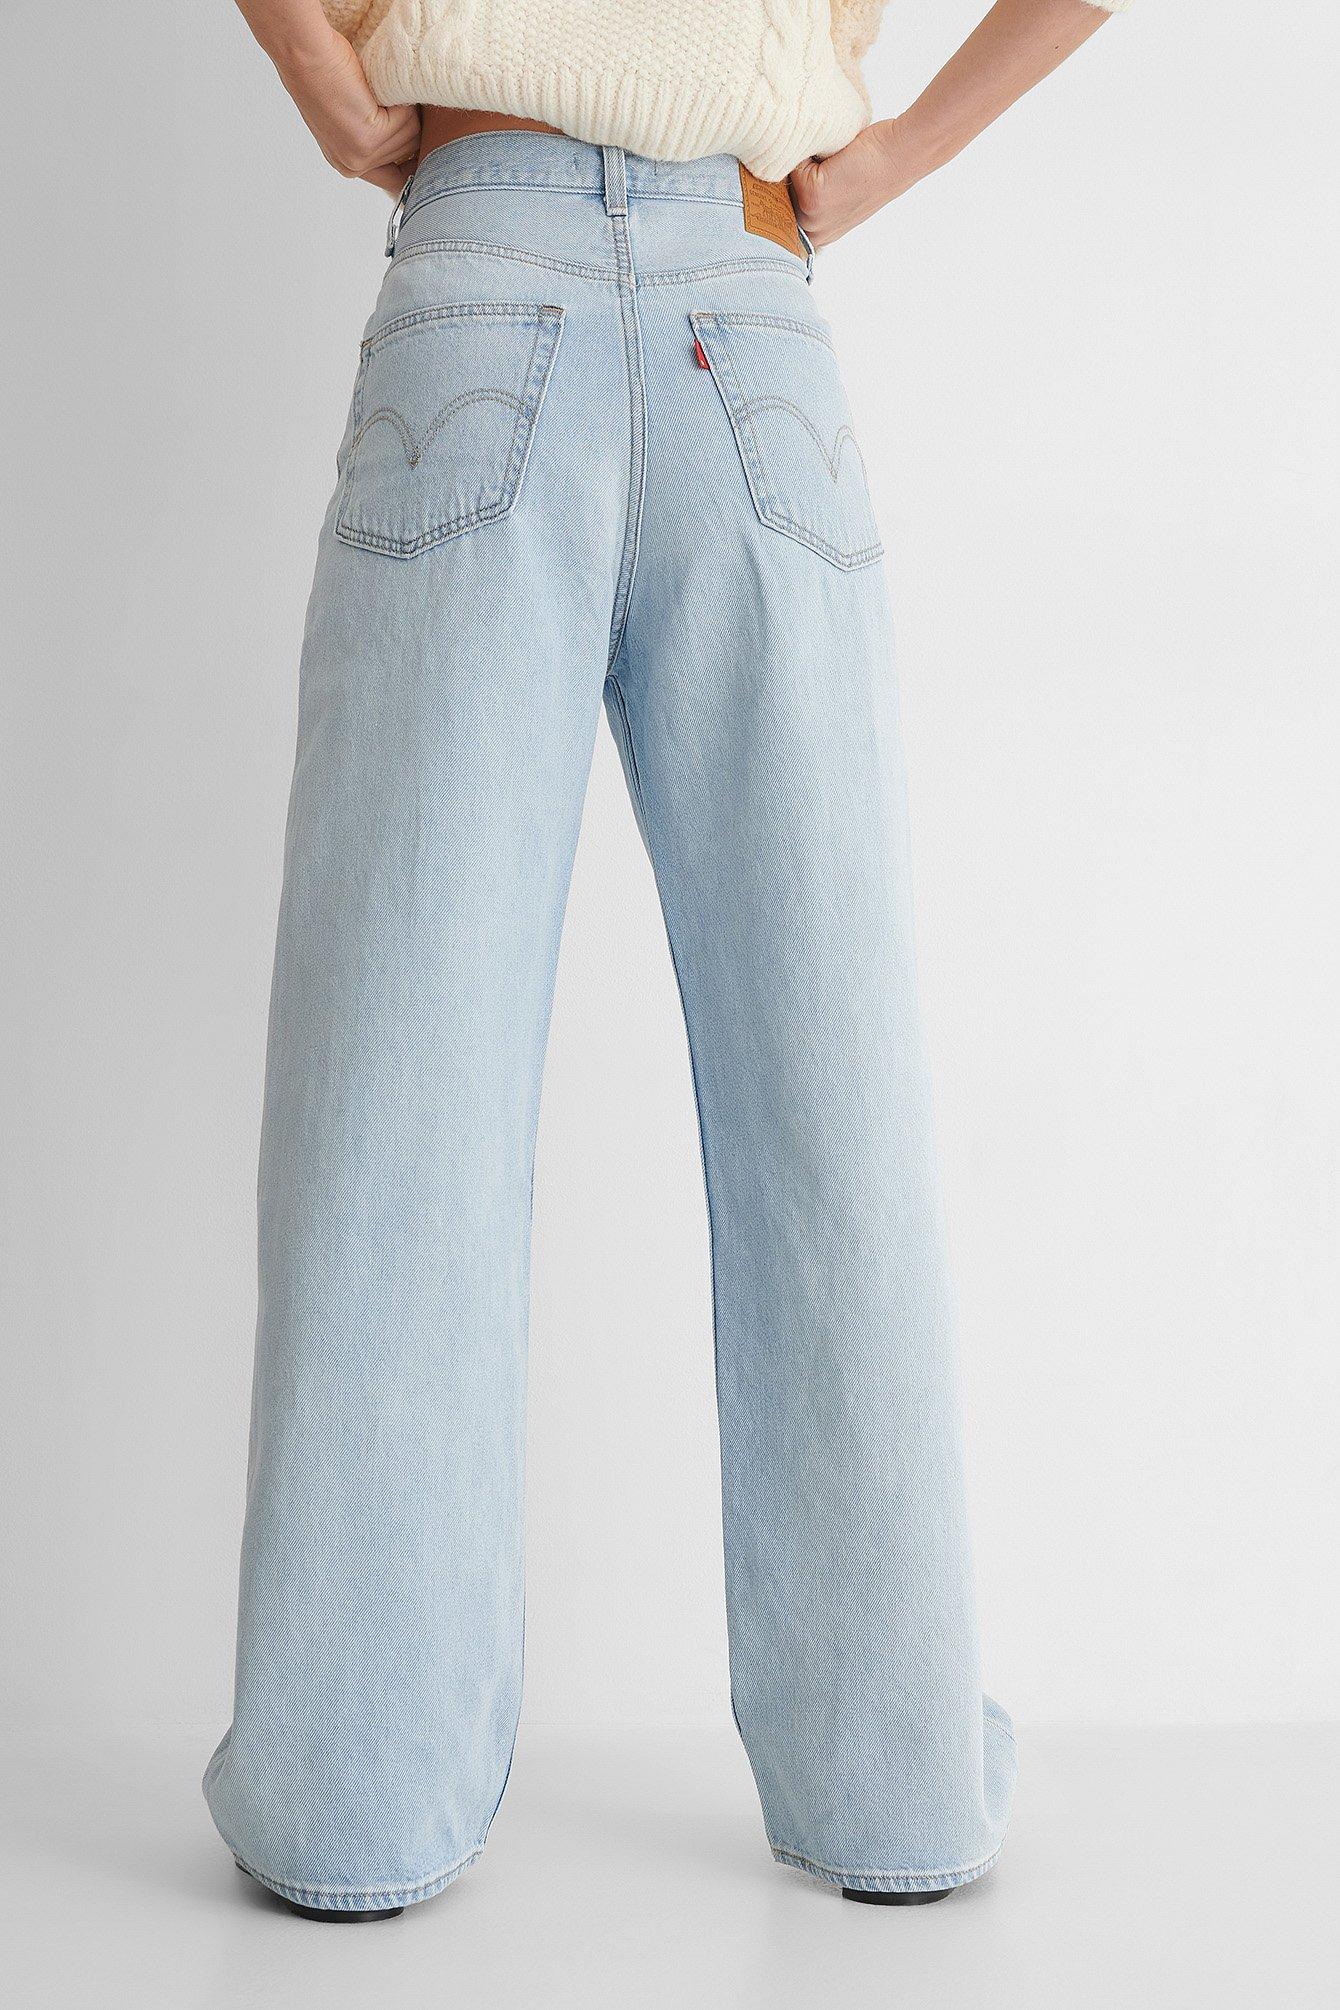 Levi's Denim Blue High Loose Jeans Loosey Goosey - Lyst